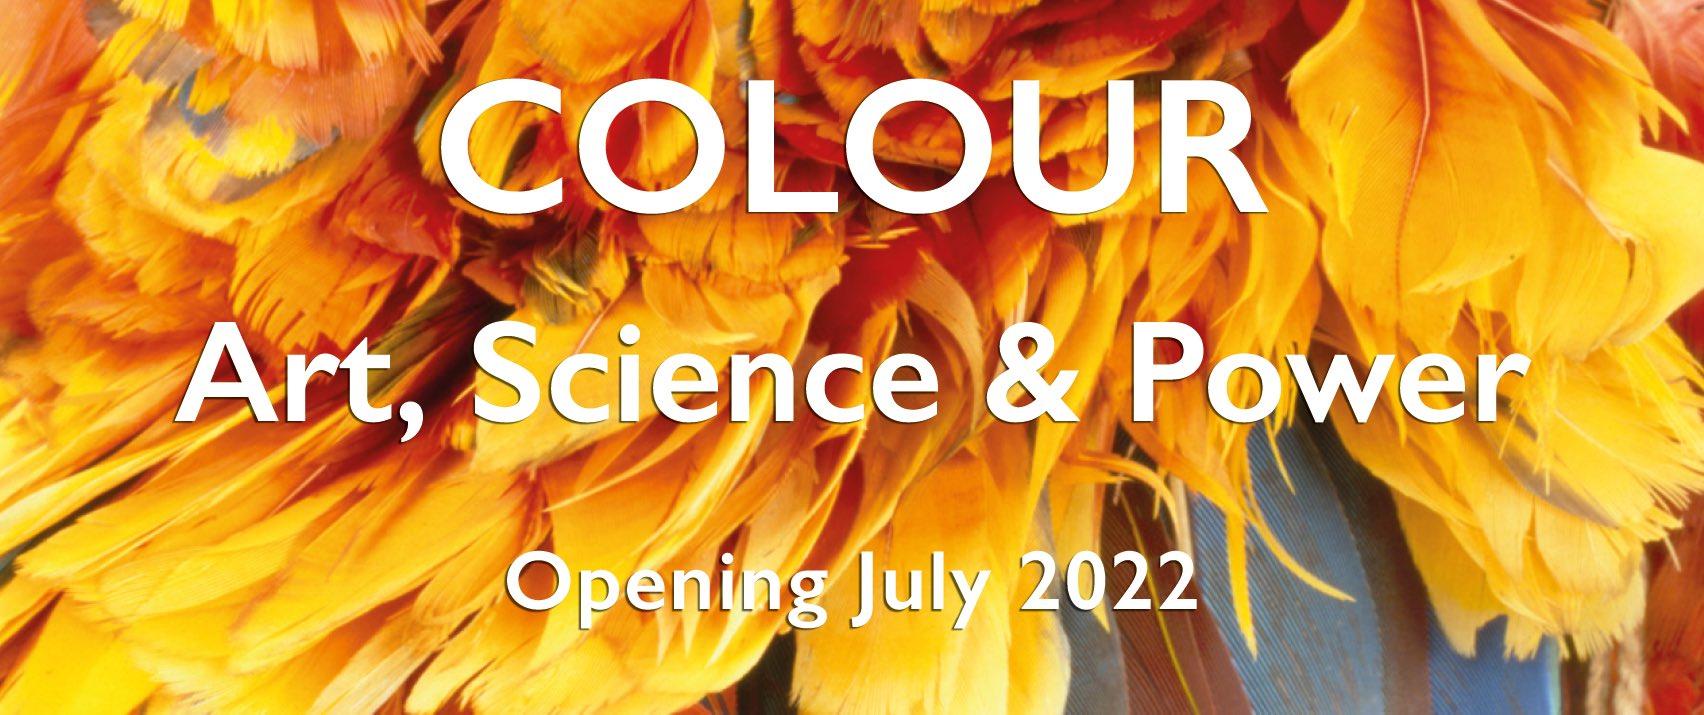 Banner with the words 'COLOUR: Art Science and Power / opening July 2022' against a zoomed in, brightly coloured image of a feathered headdress, in bright reds, yellows and blues.